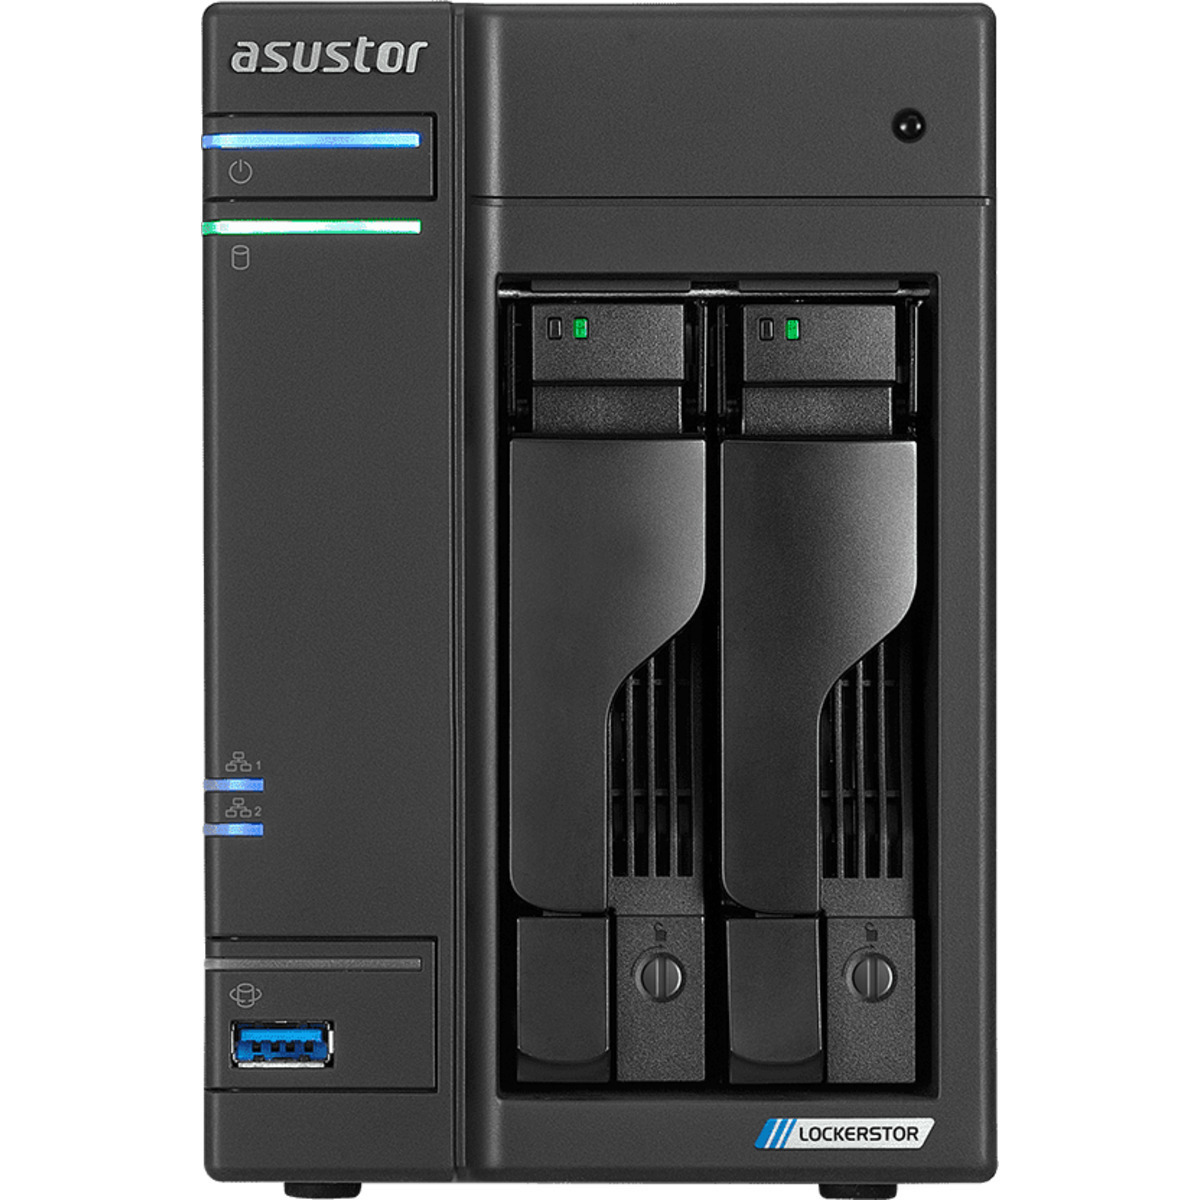 ASUSTOR AS6602T Lockerstor 2 24tb 2-Bay Desktop Multimedia / Power User / Business NAS - Network Attached Storage Device 1x24tb Seagate IronWolf Pro ST24000NT002 3.5 7200rpm SATA 6Gb/s HDD NAS Class Drives Installed - Burn-In Tested - FREE RAM UPGRADE AS6602T Lockerstor 2